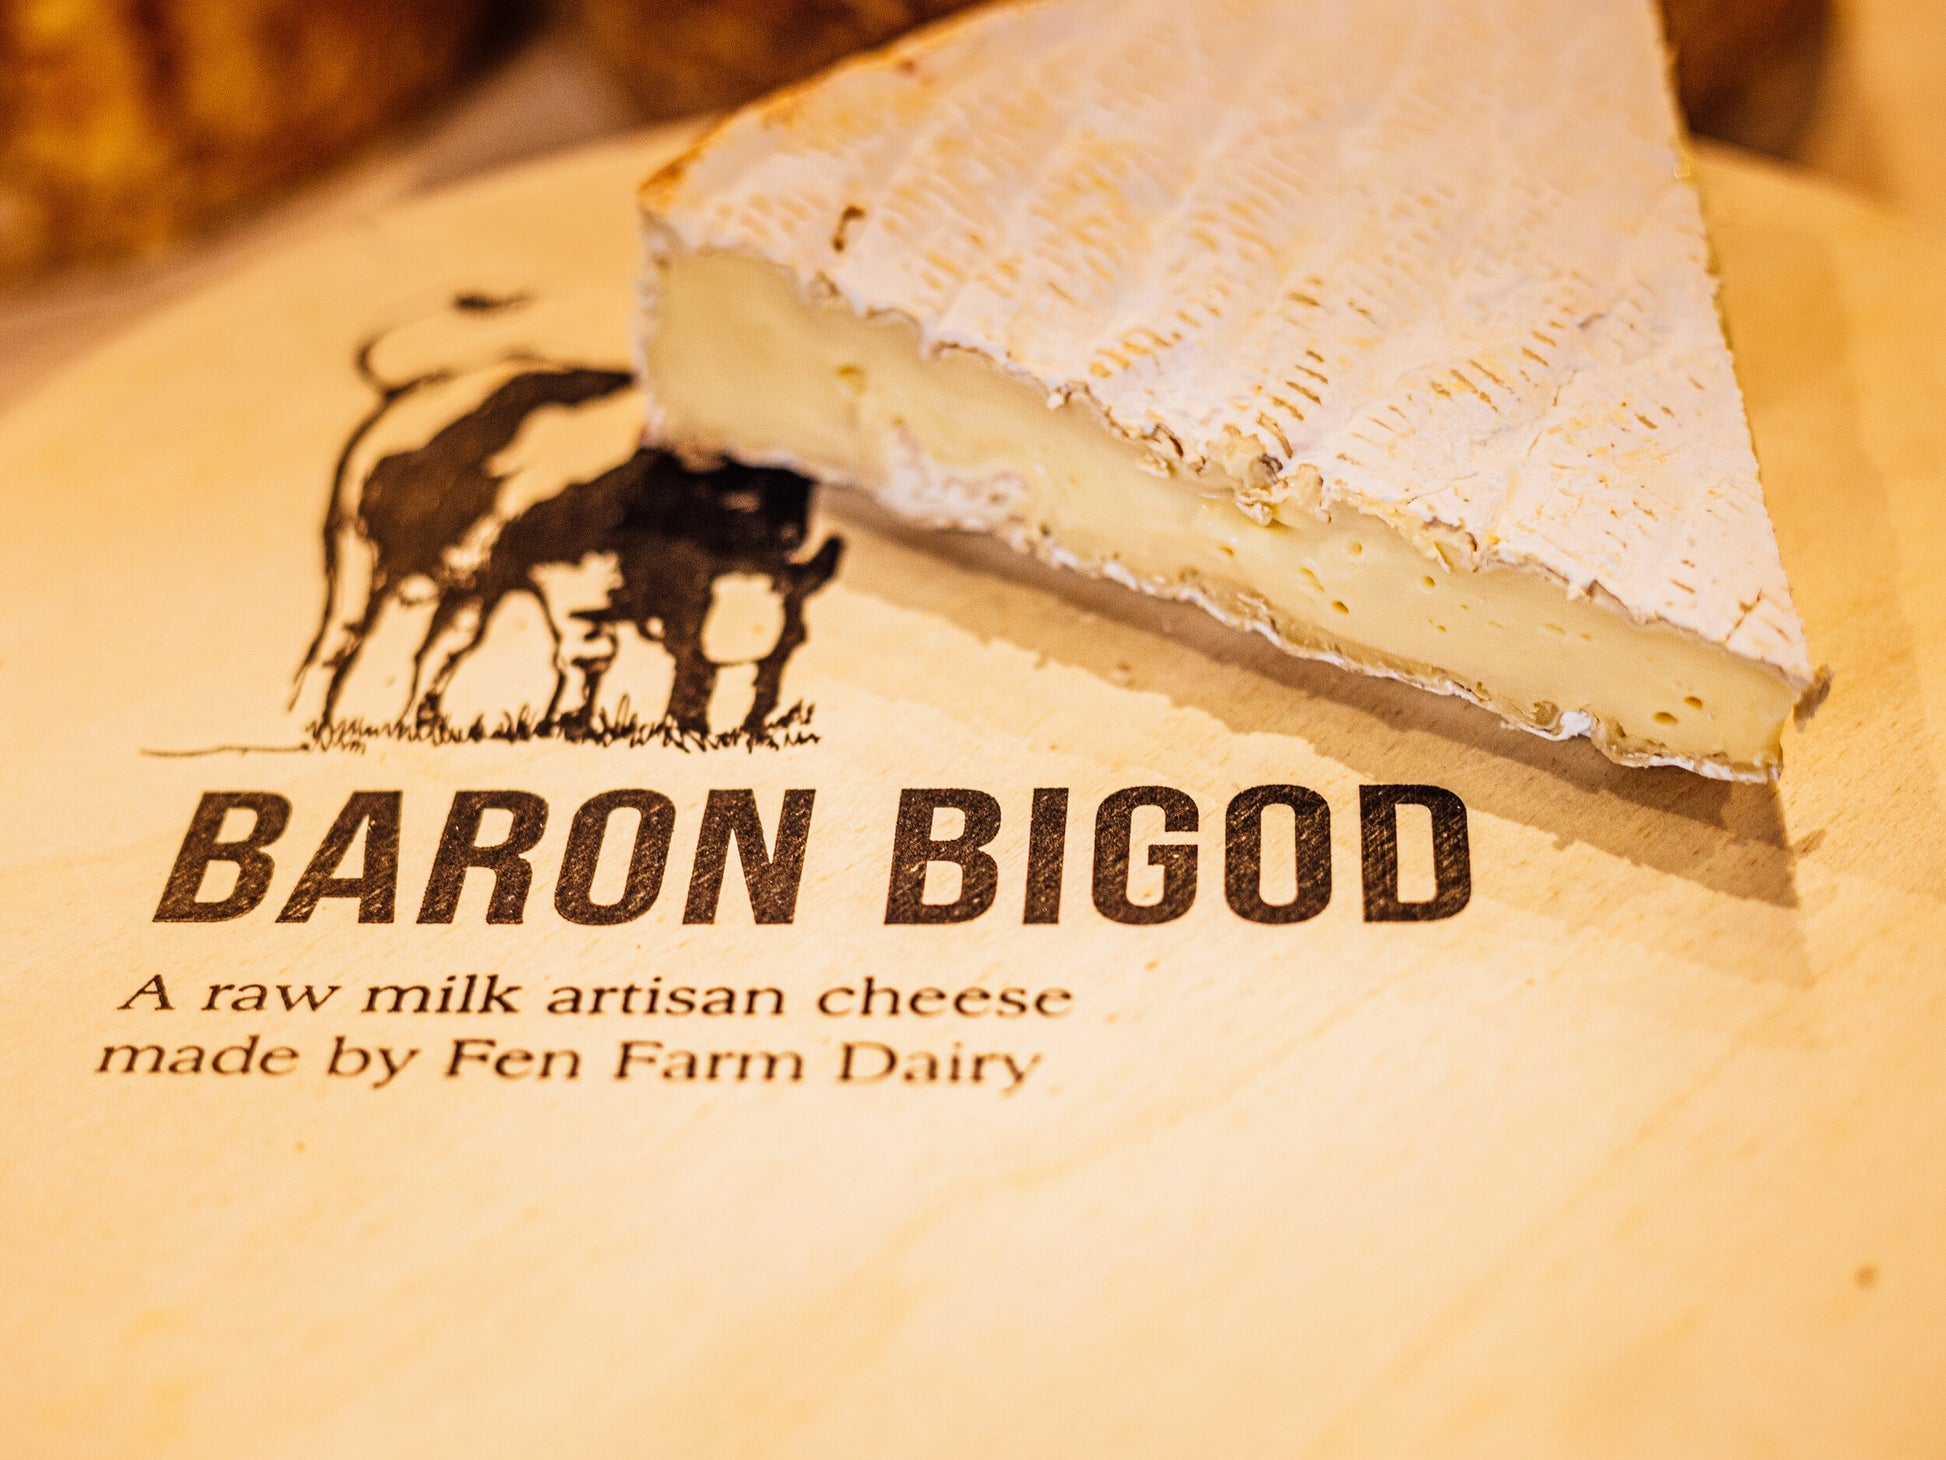 Close up of Baron Bigod brie wedge showing it's melting creamy texture